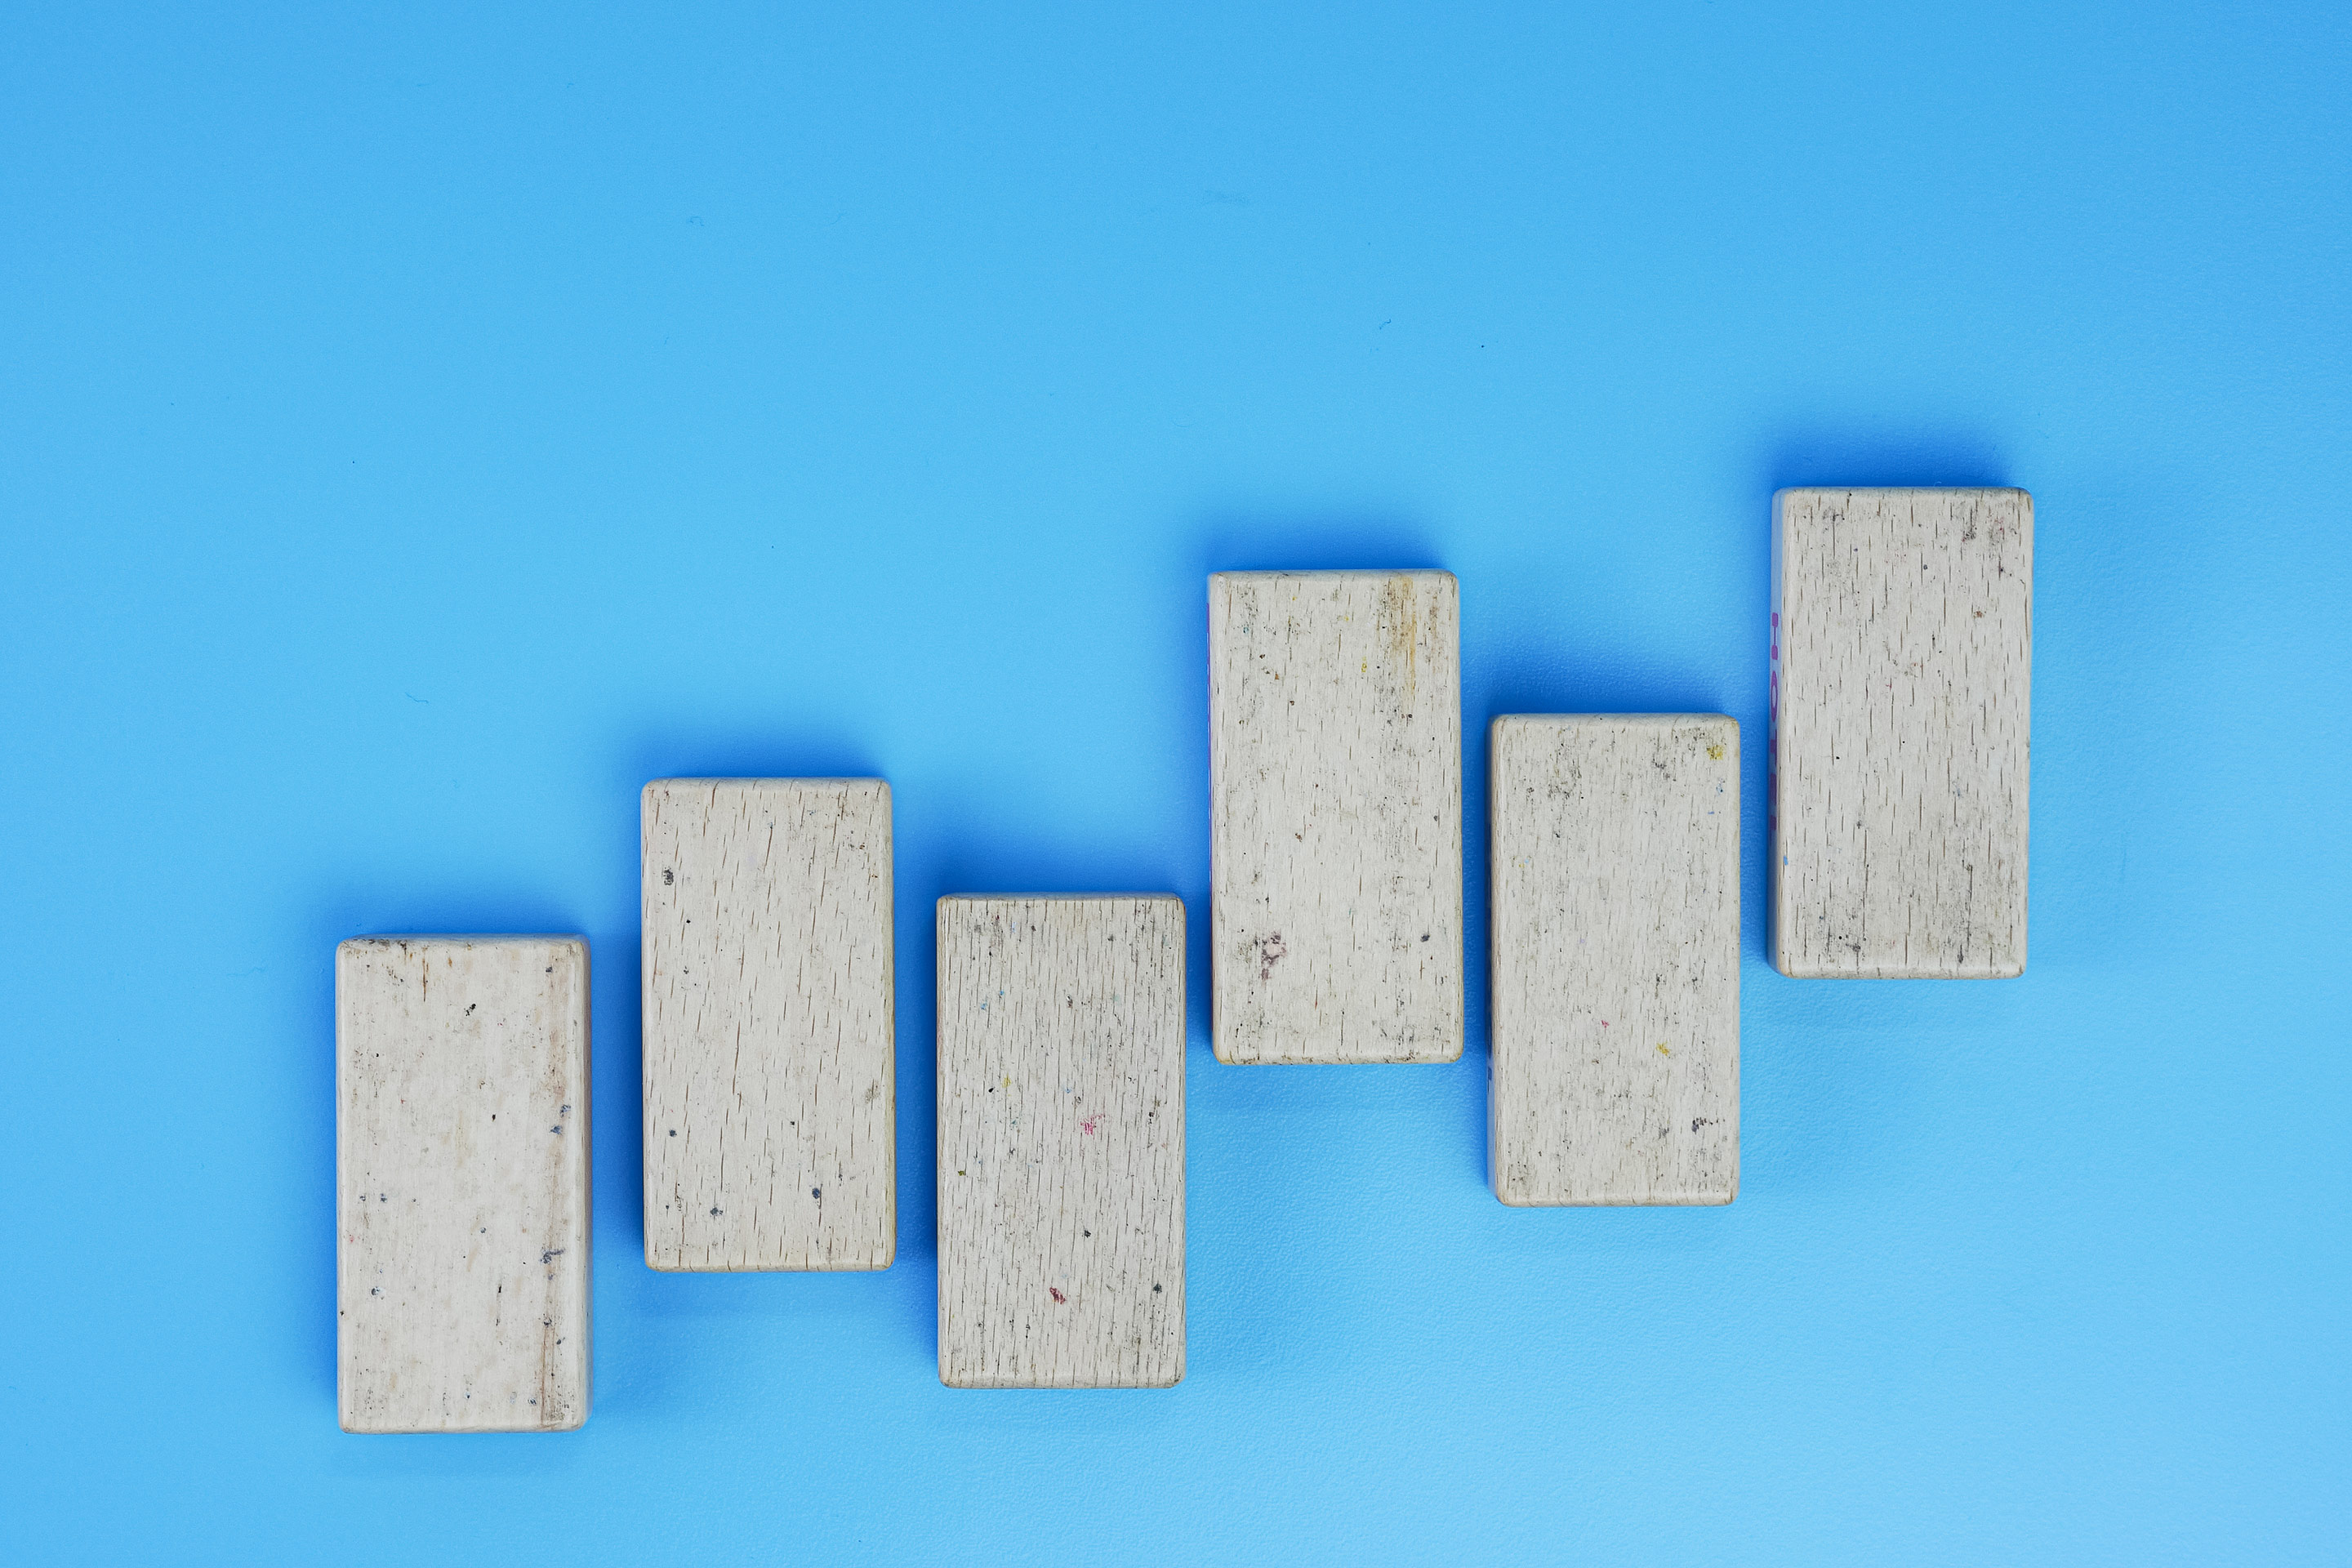 Six gray, concrete bricks are lined up in an alternating pattern that rises like bars on a graph. They stand out against a bright blue background.